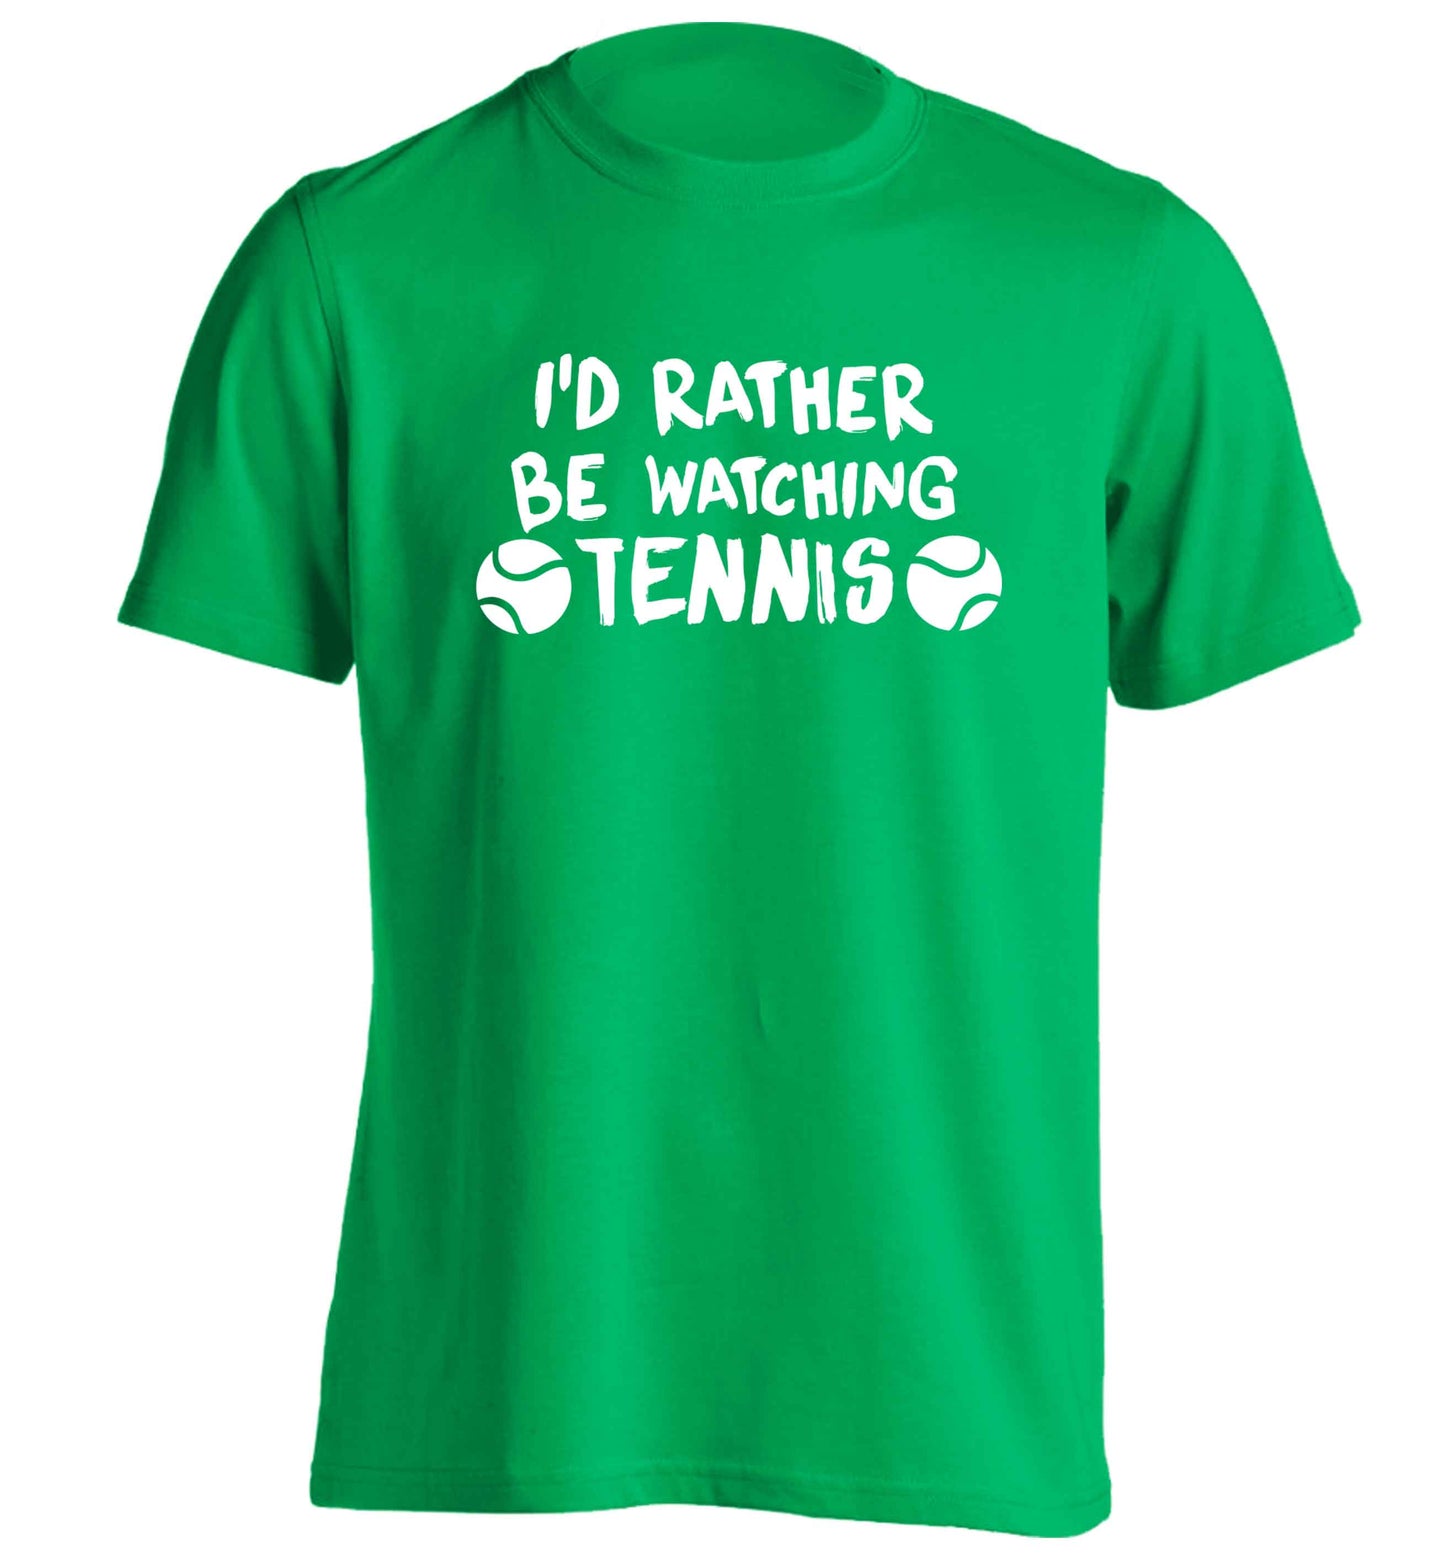 I'd rather be watching the tennis adults unisex green Tshirt 2XL